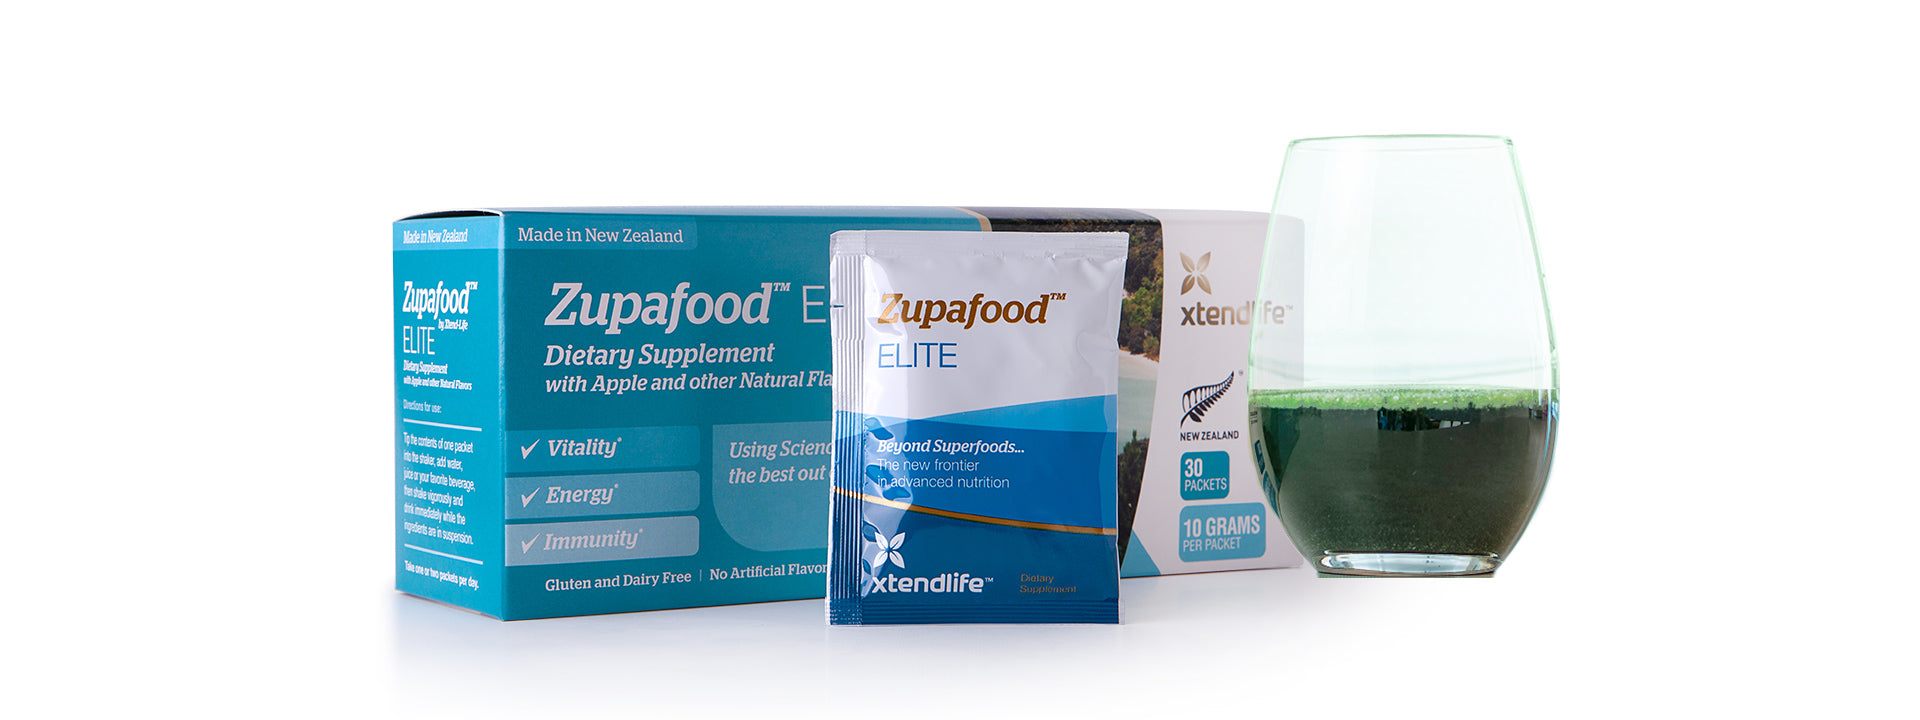 And The Winner Is… Xtend-Life’s Zupafoods Elite!